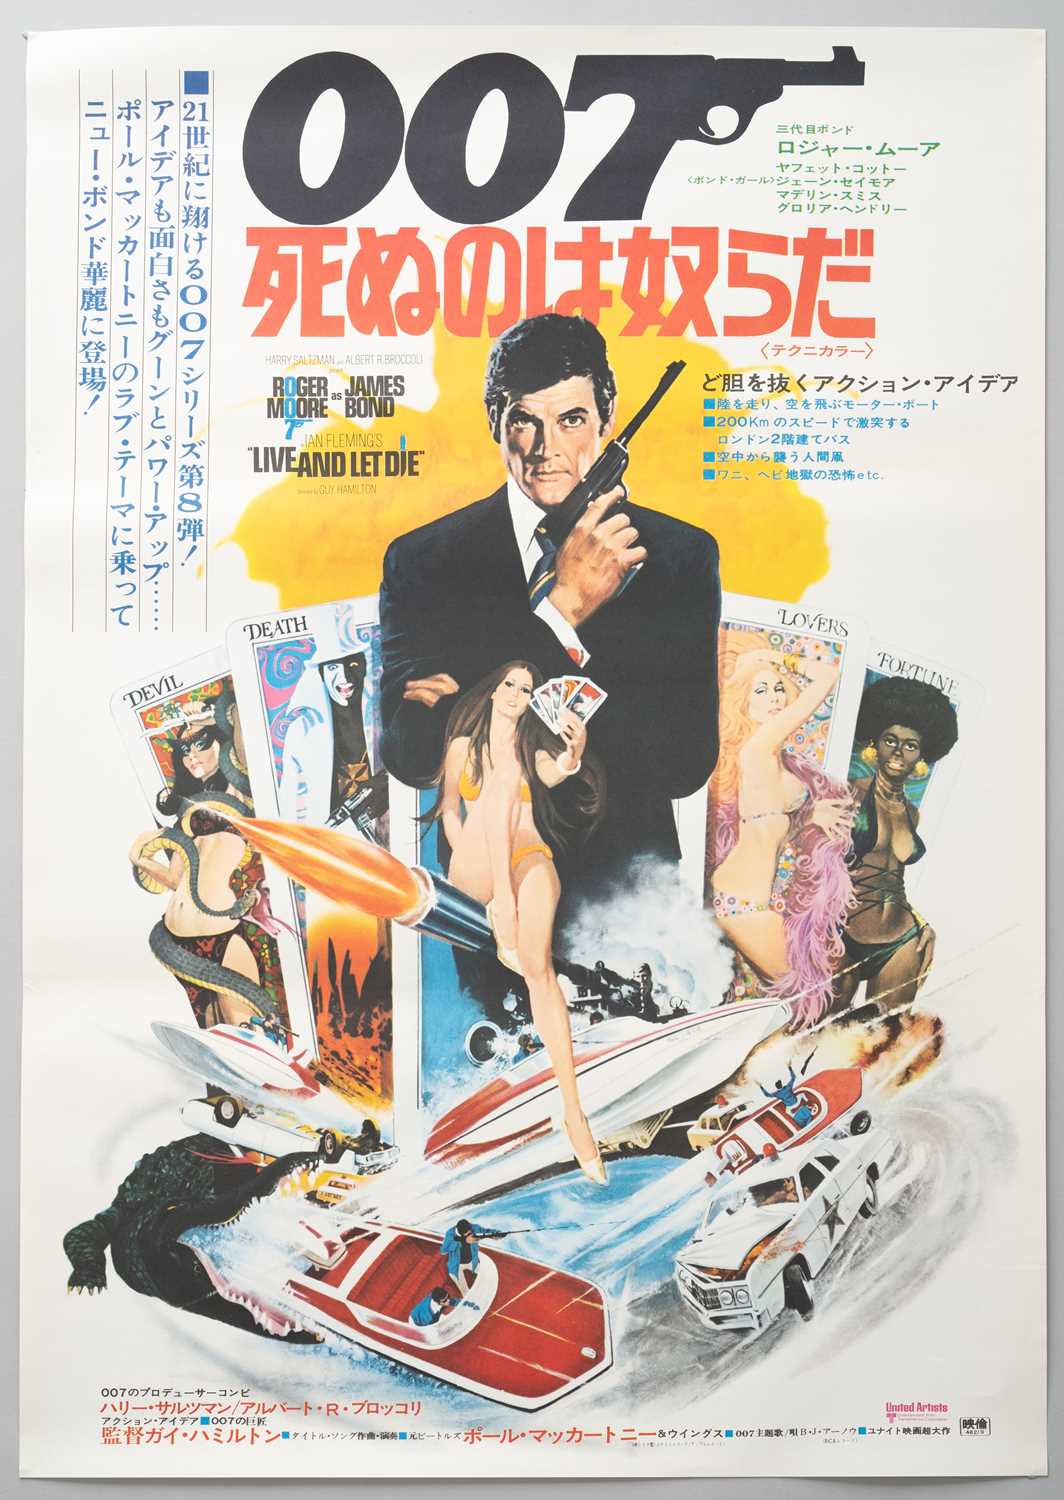 A JAPANESE JAMES BOND 007 POSTER SHOWA ERA, 1973 Featuring Roger Moore in Live and Let Die (1973),